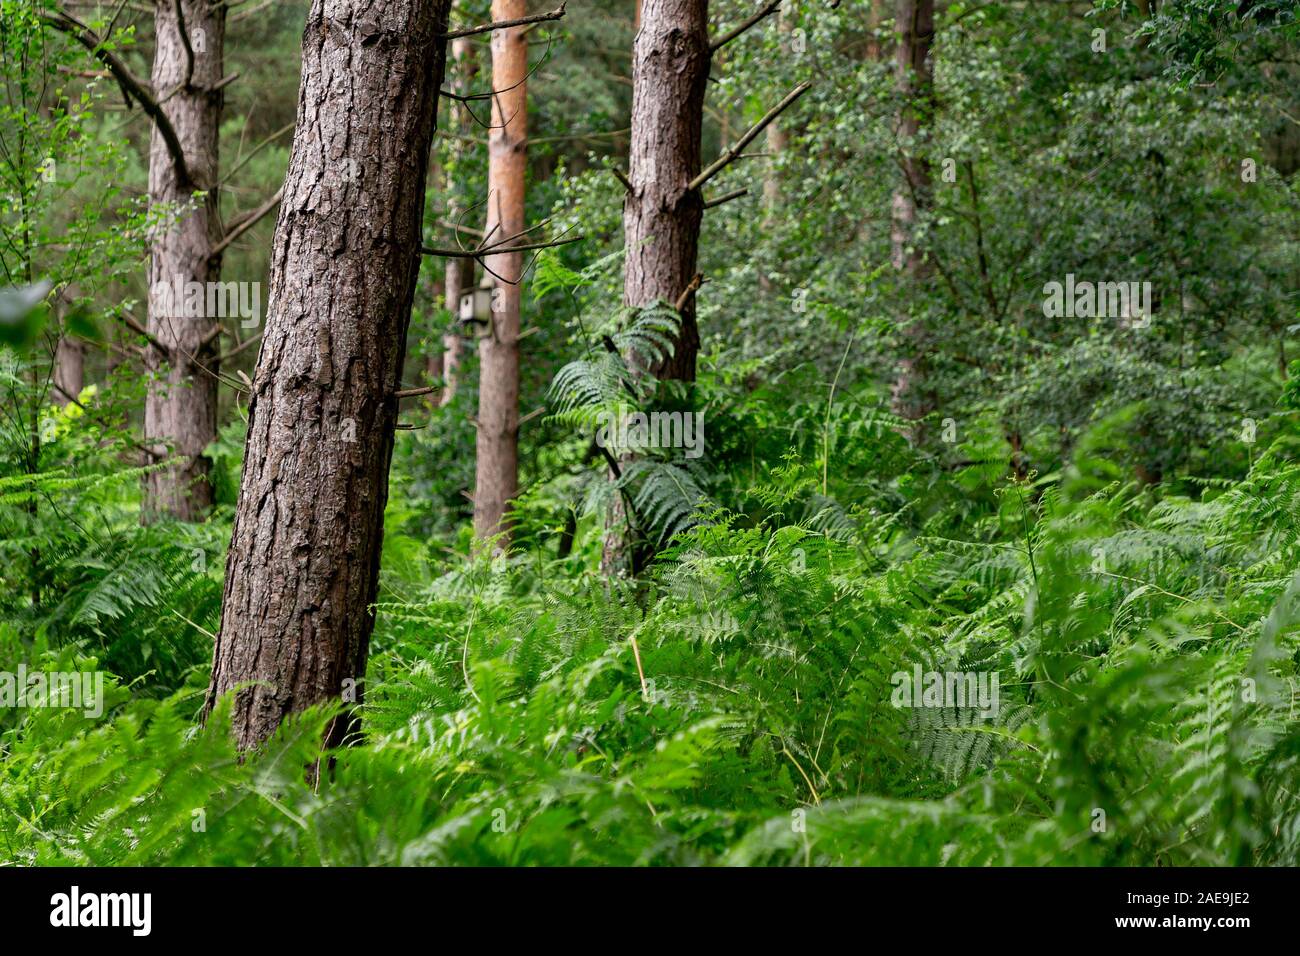 Ferns, moving with the wind at Daresbury Firs, against the trunks of static trees Stock Photo